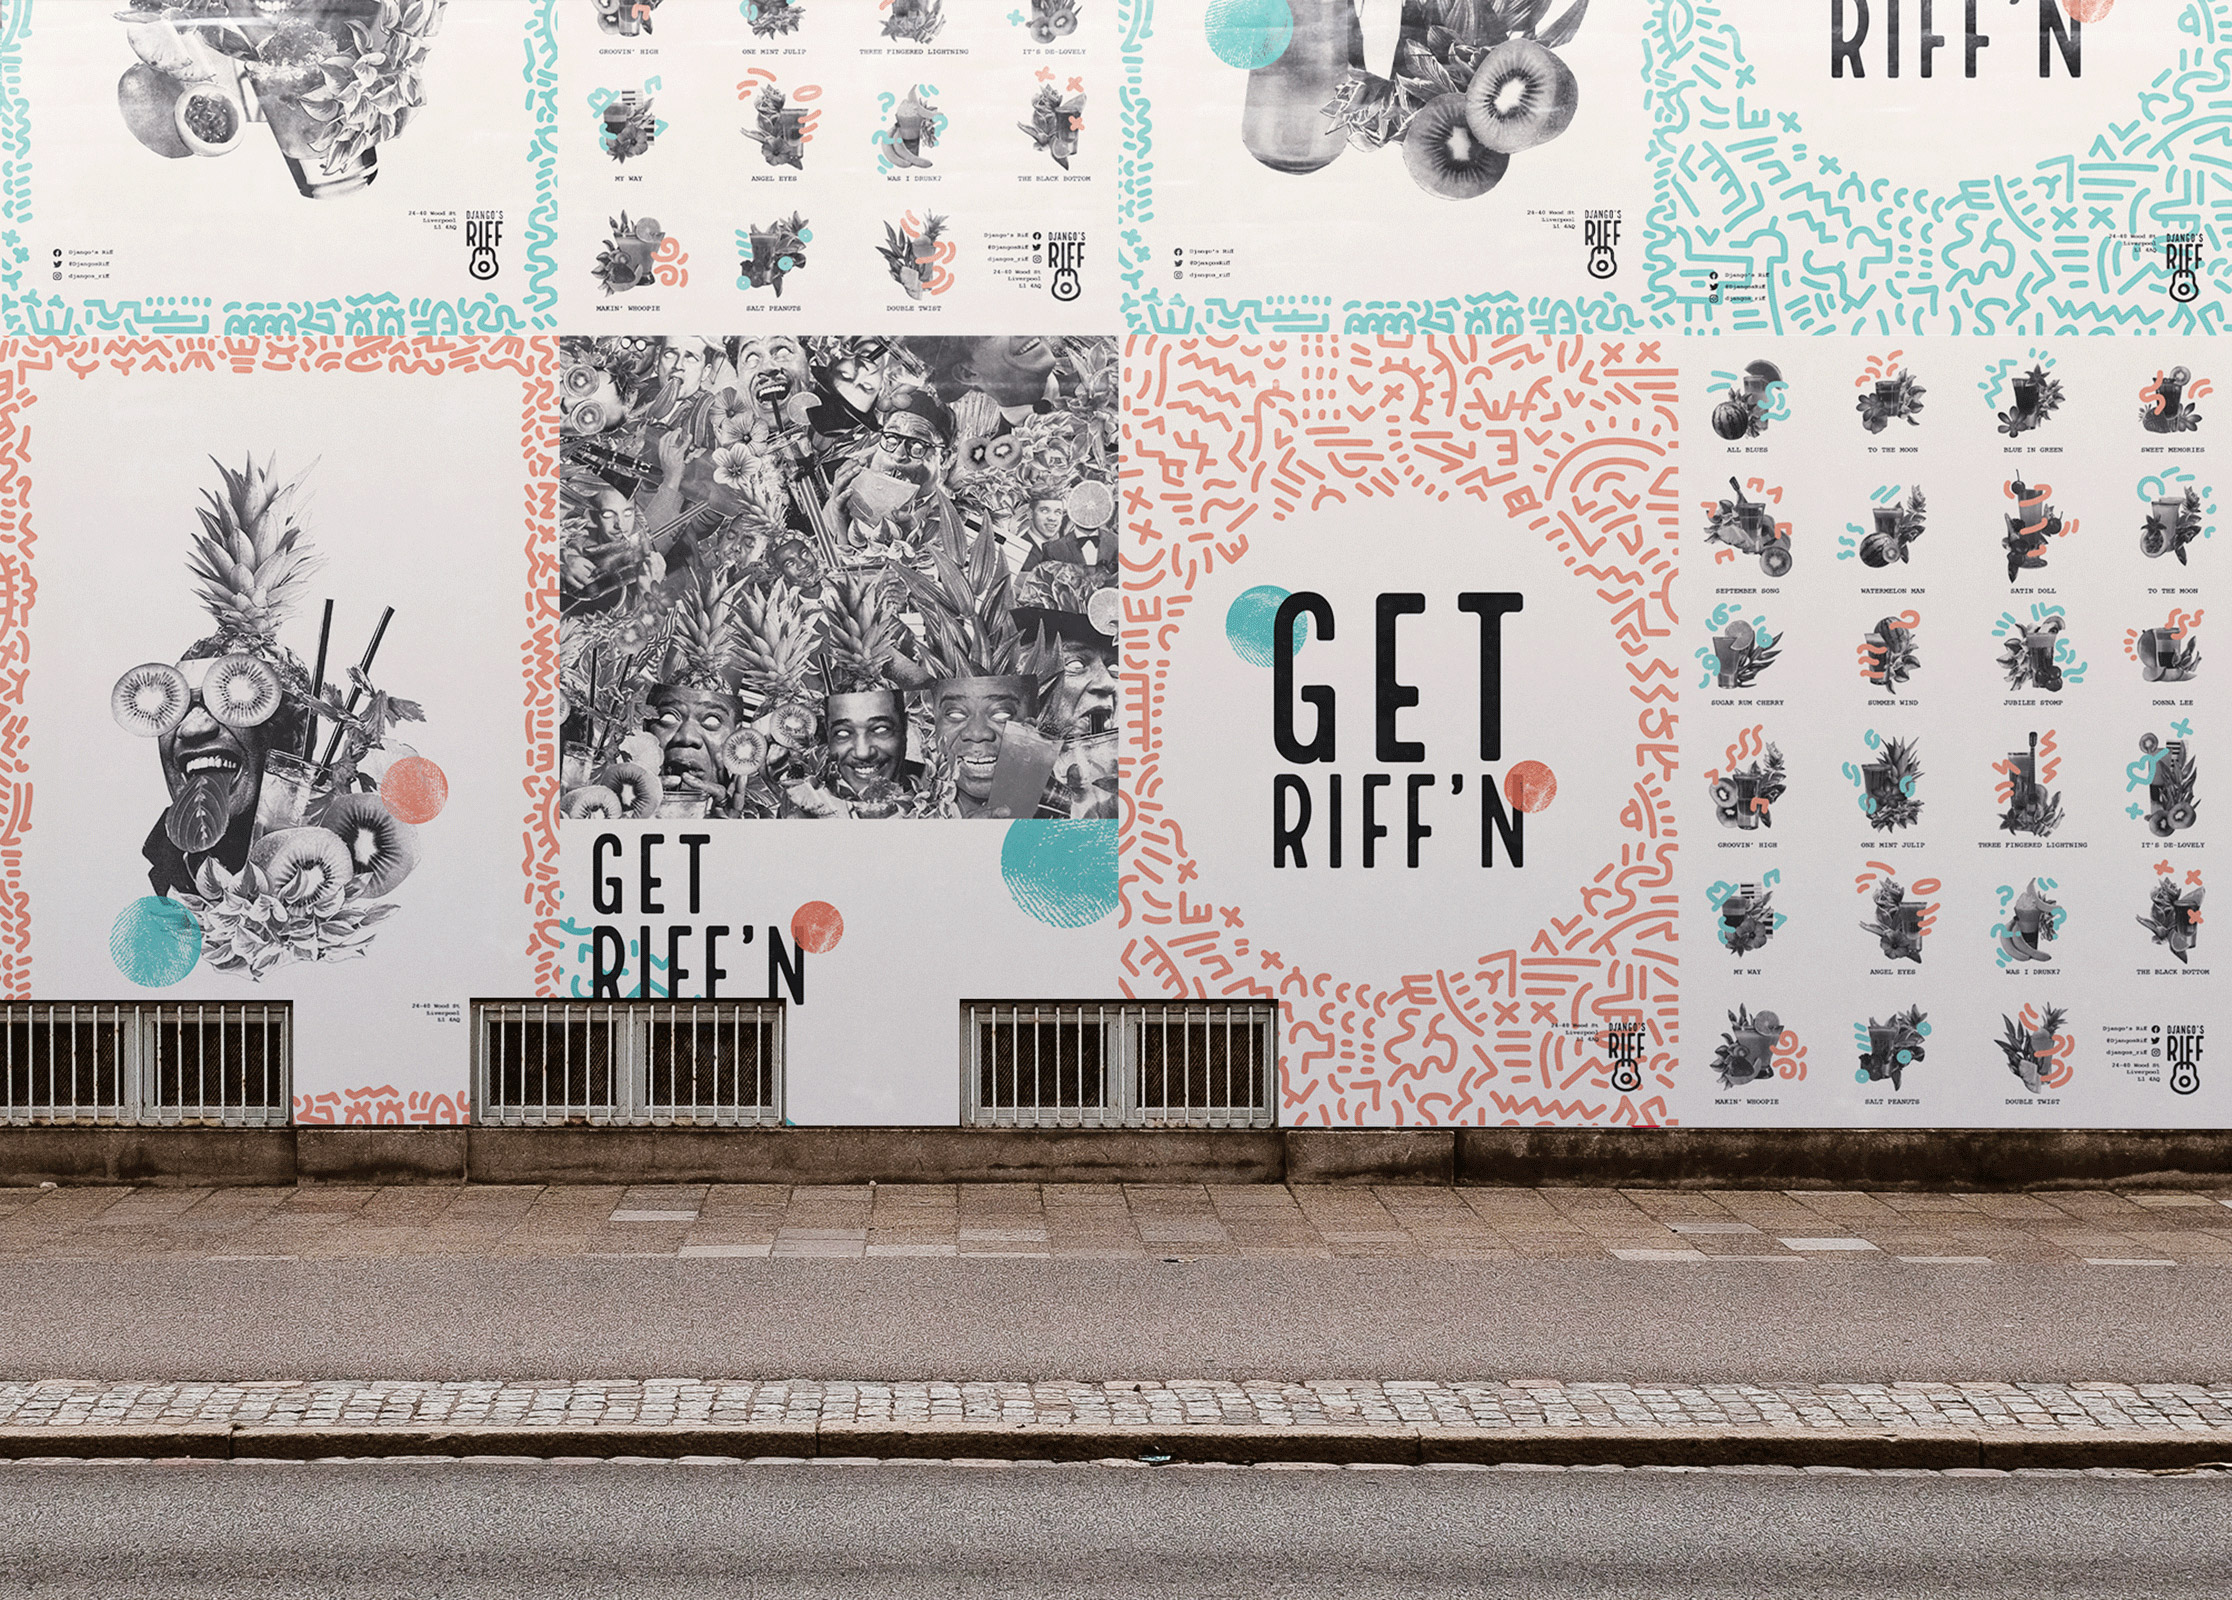 Mock-up photograph of a variety of flyposters pasted up on a wall